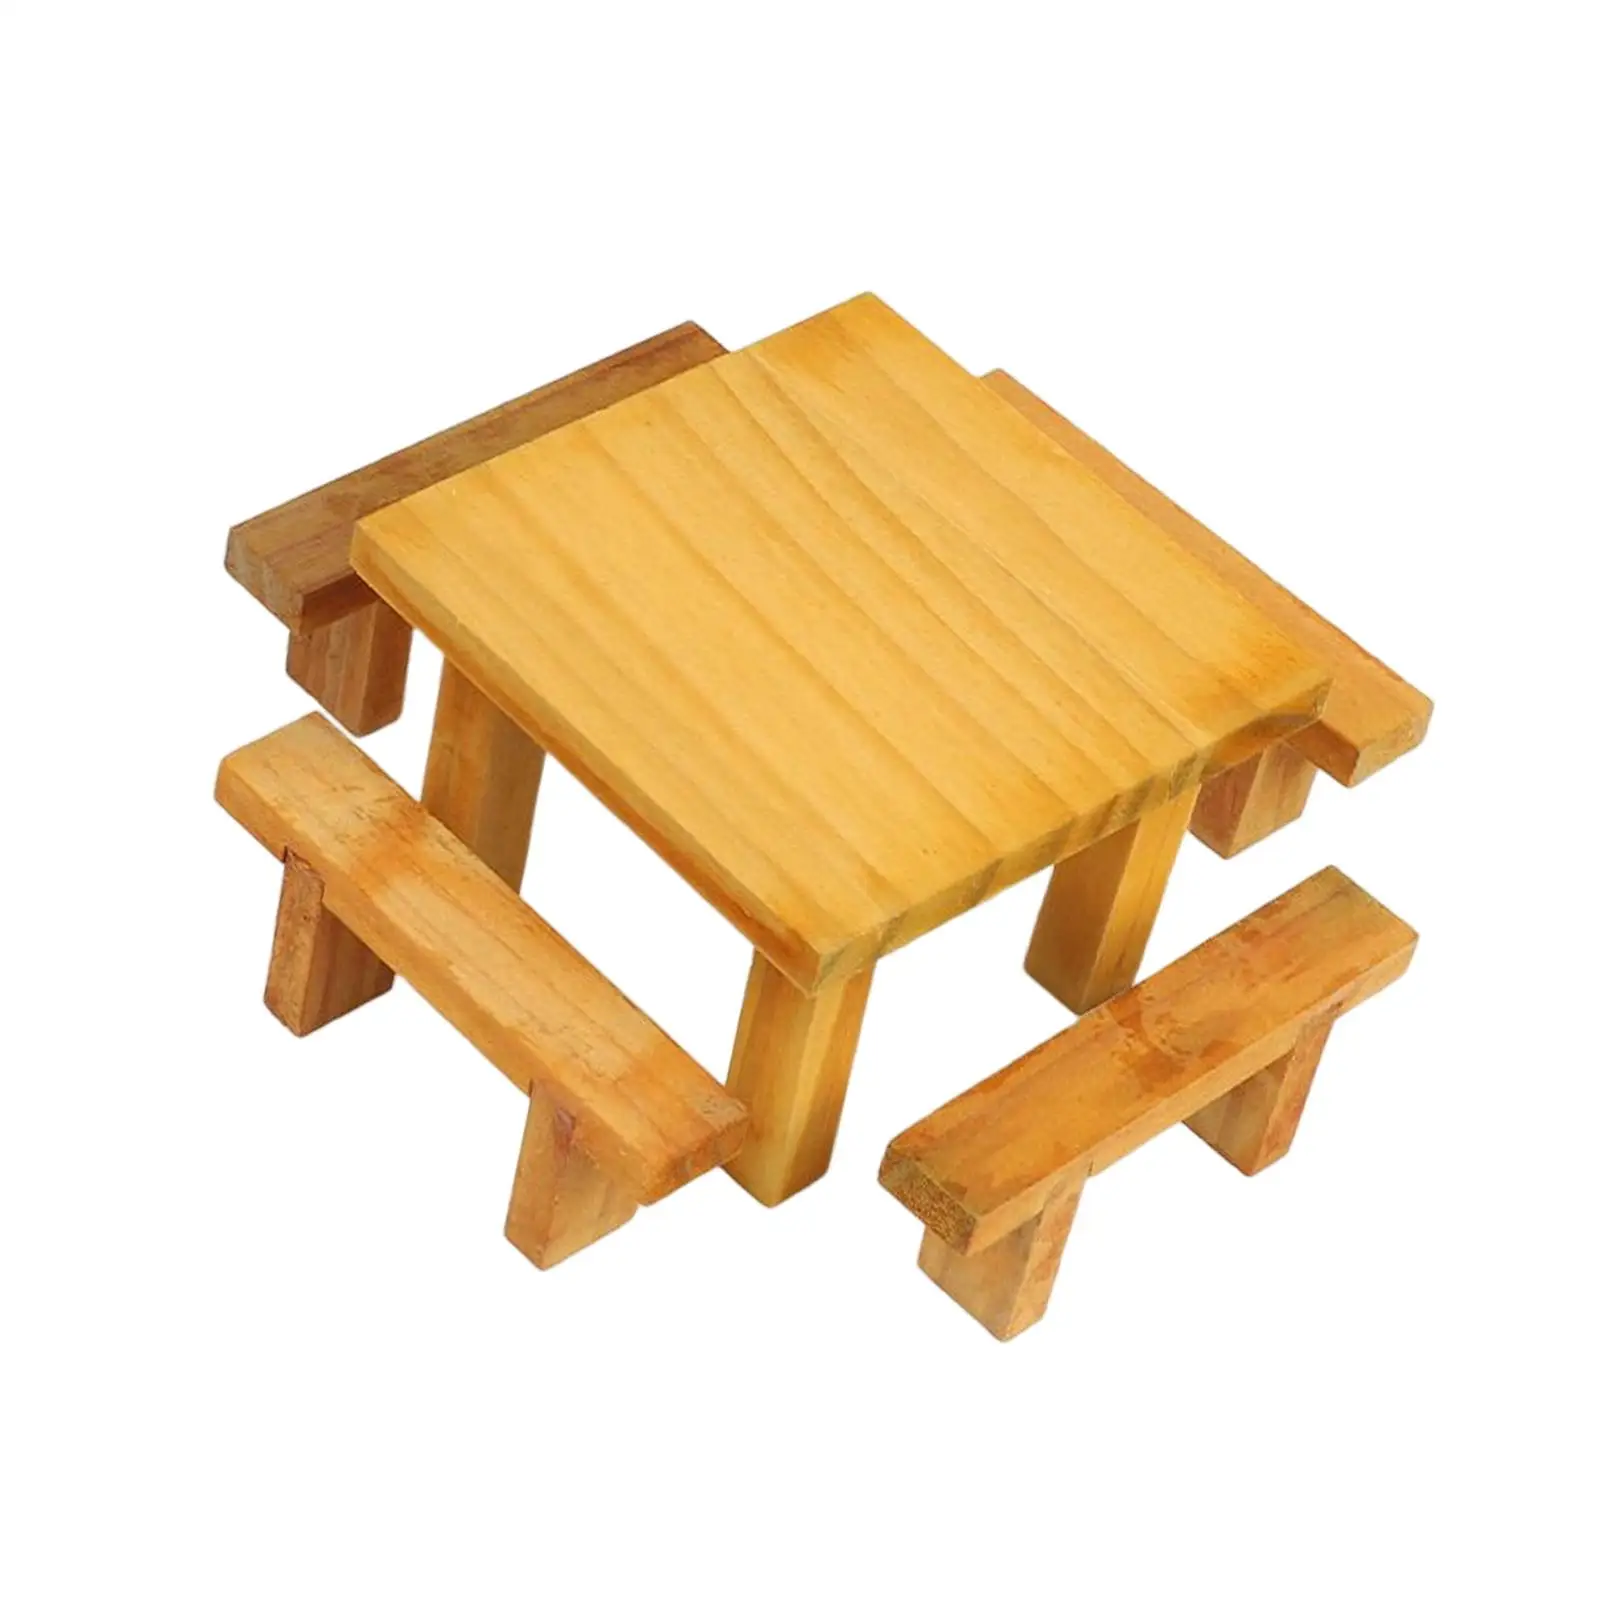 Miniature Desk Stool Ornaments Props Wooden 1/12 Table Chairs Set for Dollhouse Life Scene Layout Micro Landscape DIY Accessory